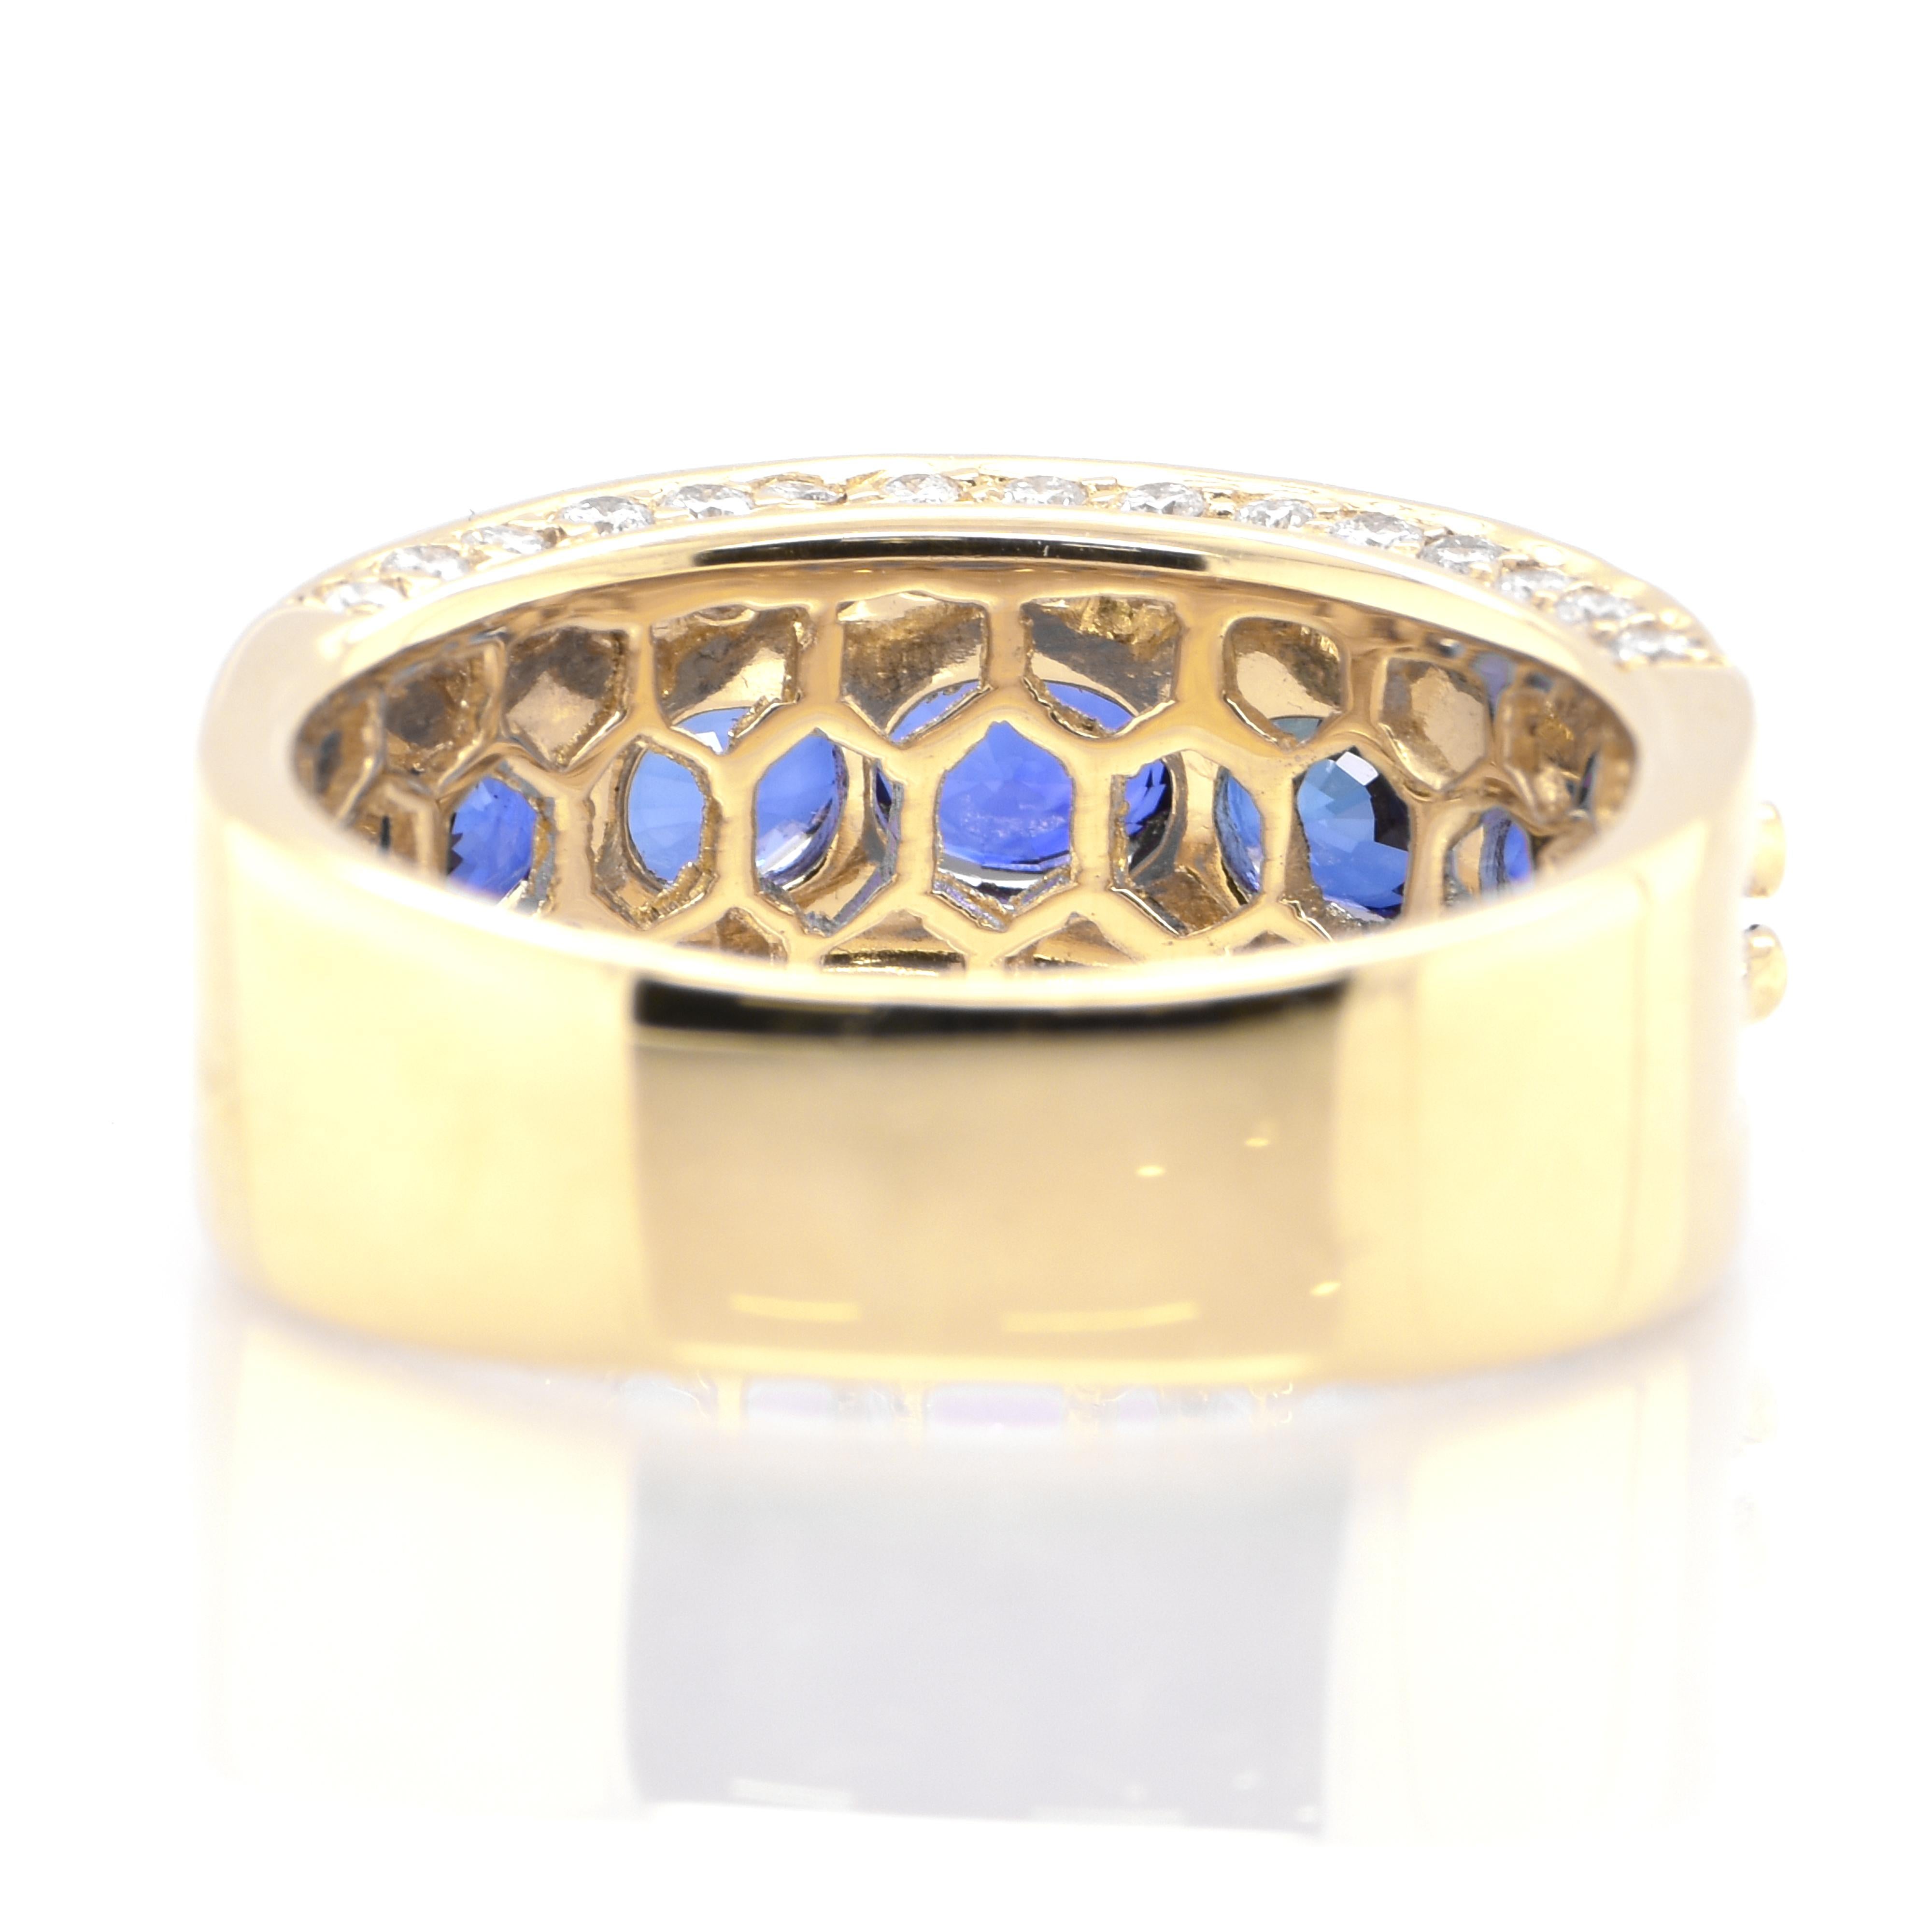 Women's Natural Oval Cut Sapphires and Diamond Half Eternity Band Ring Set in 18K Gold